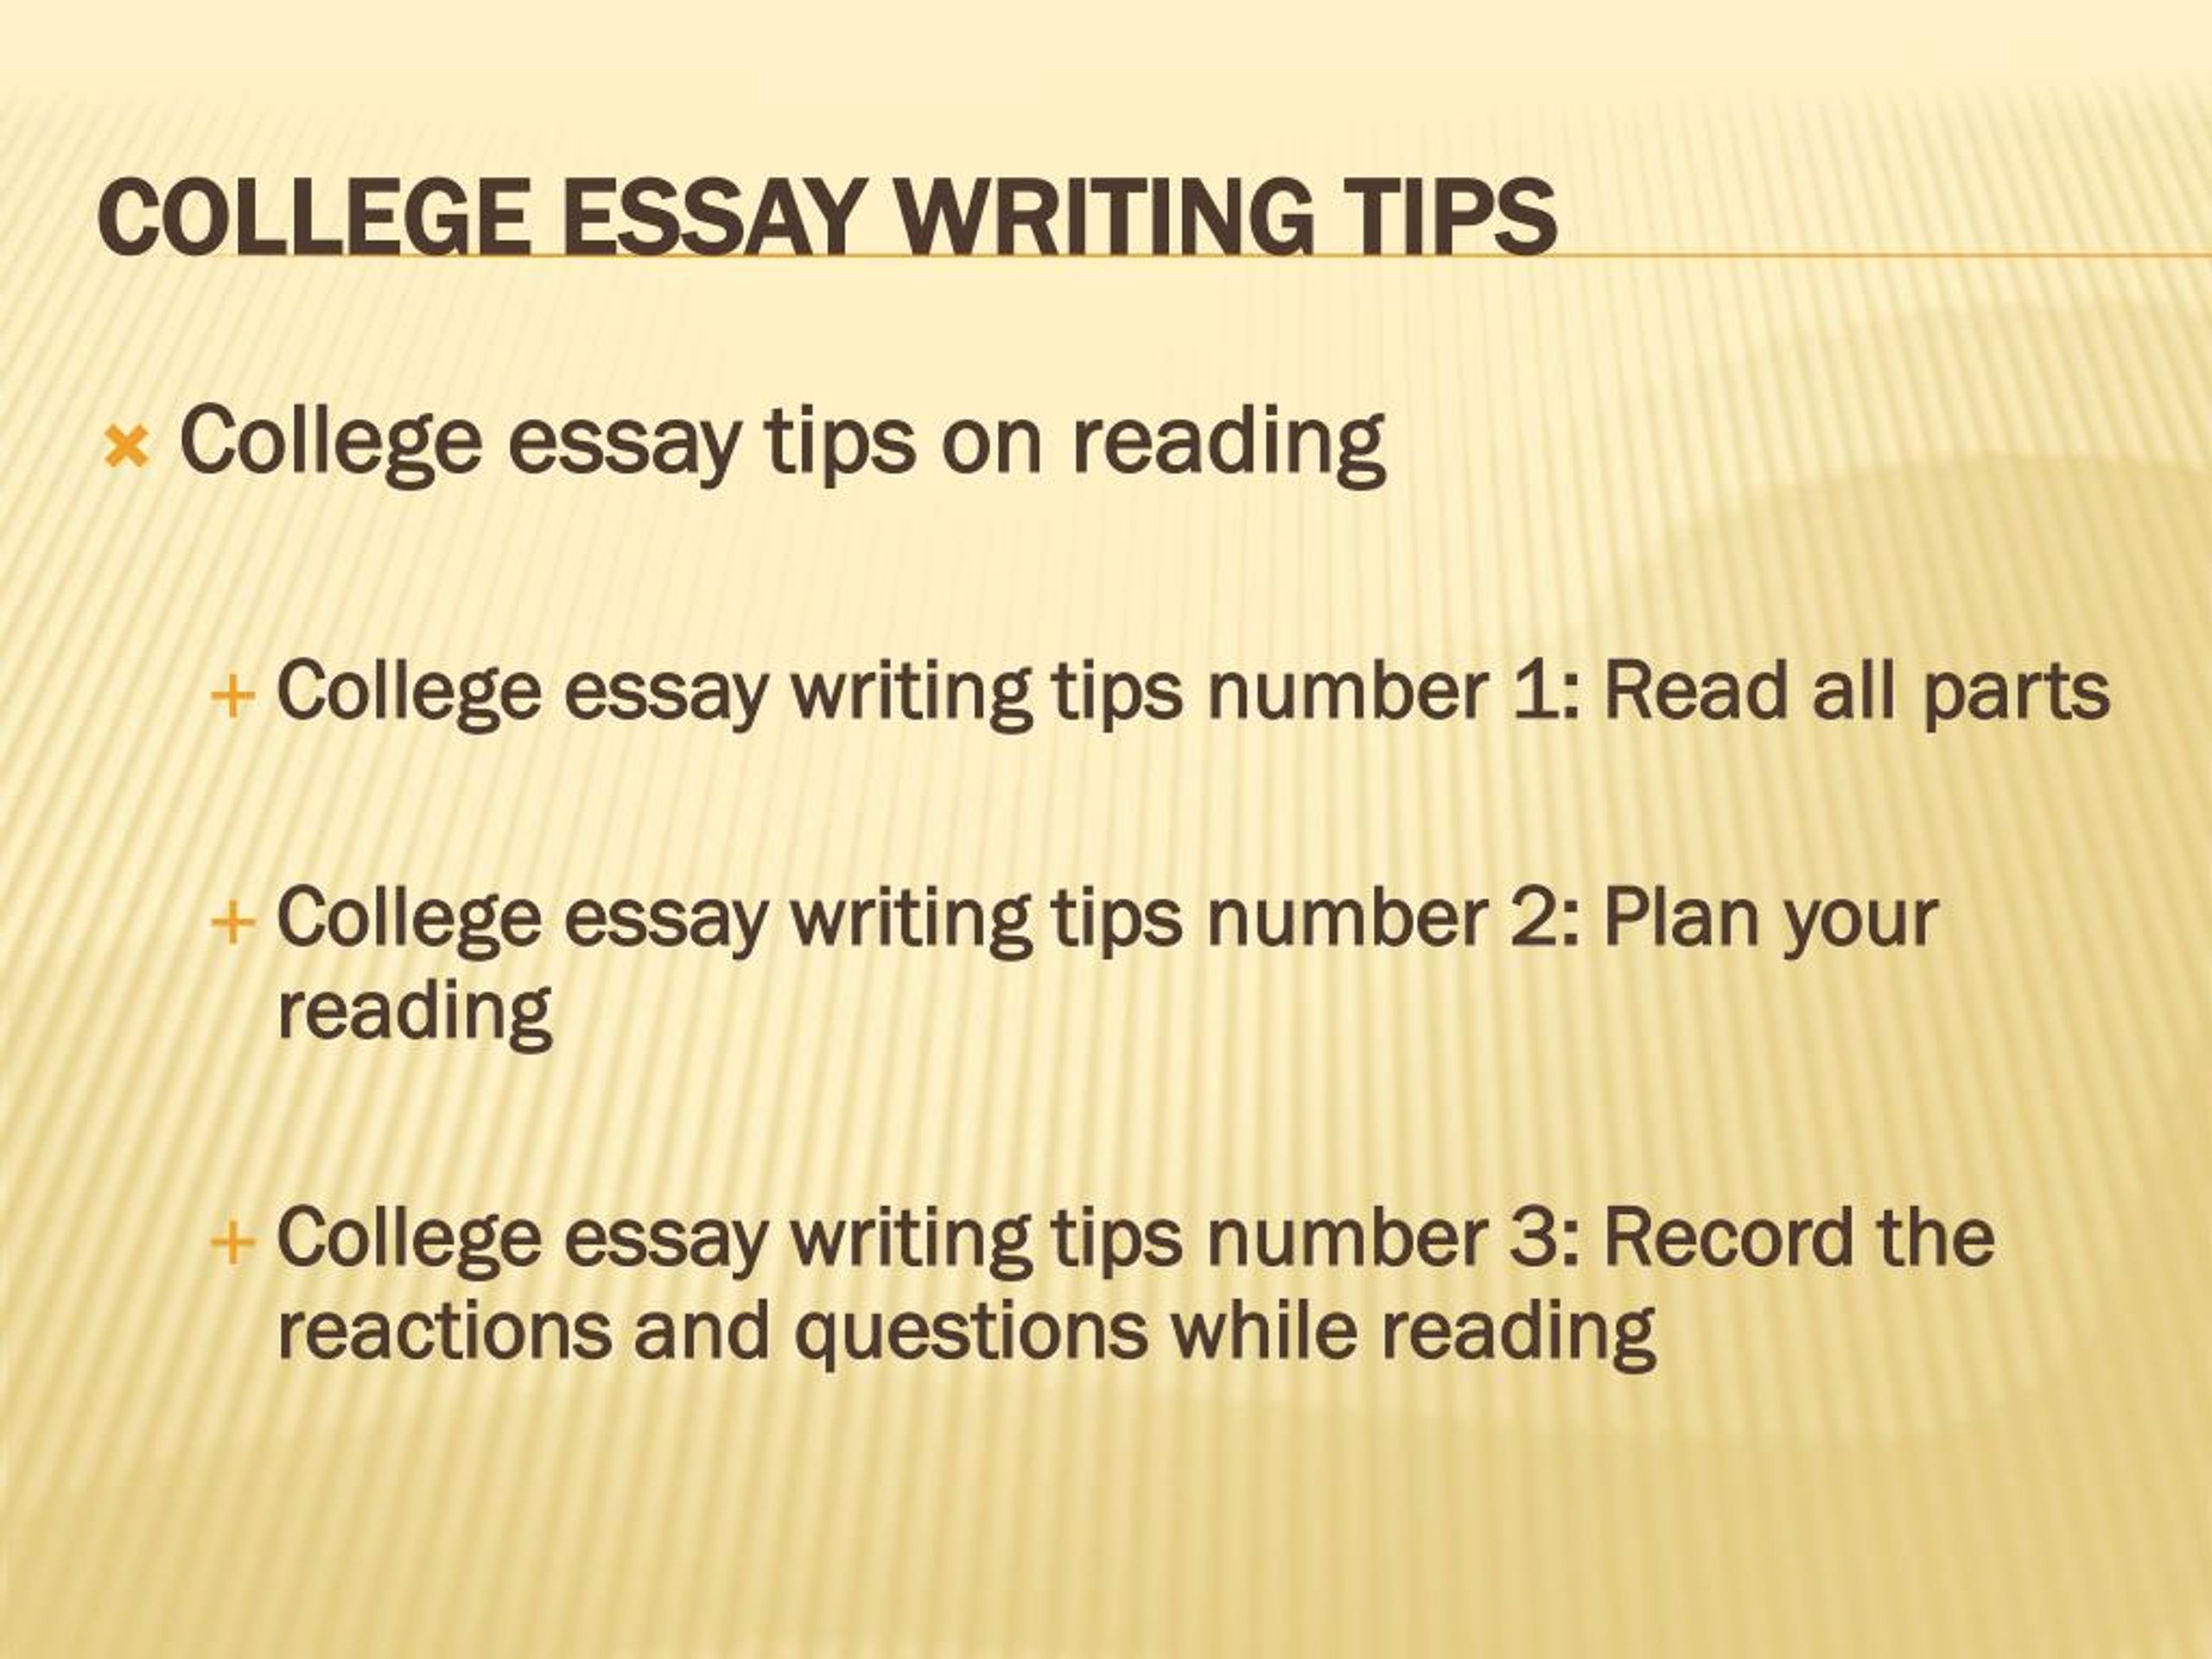 tips when writing college essays